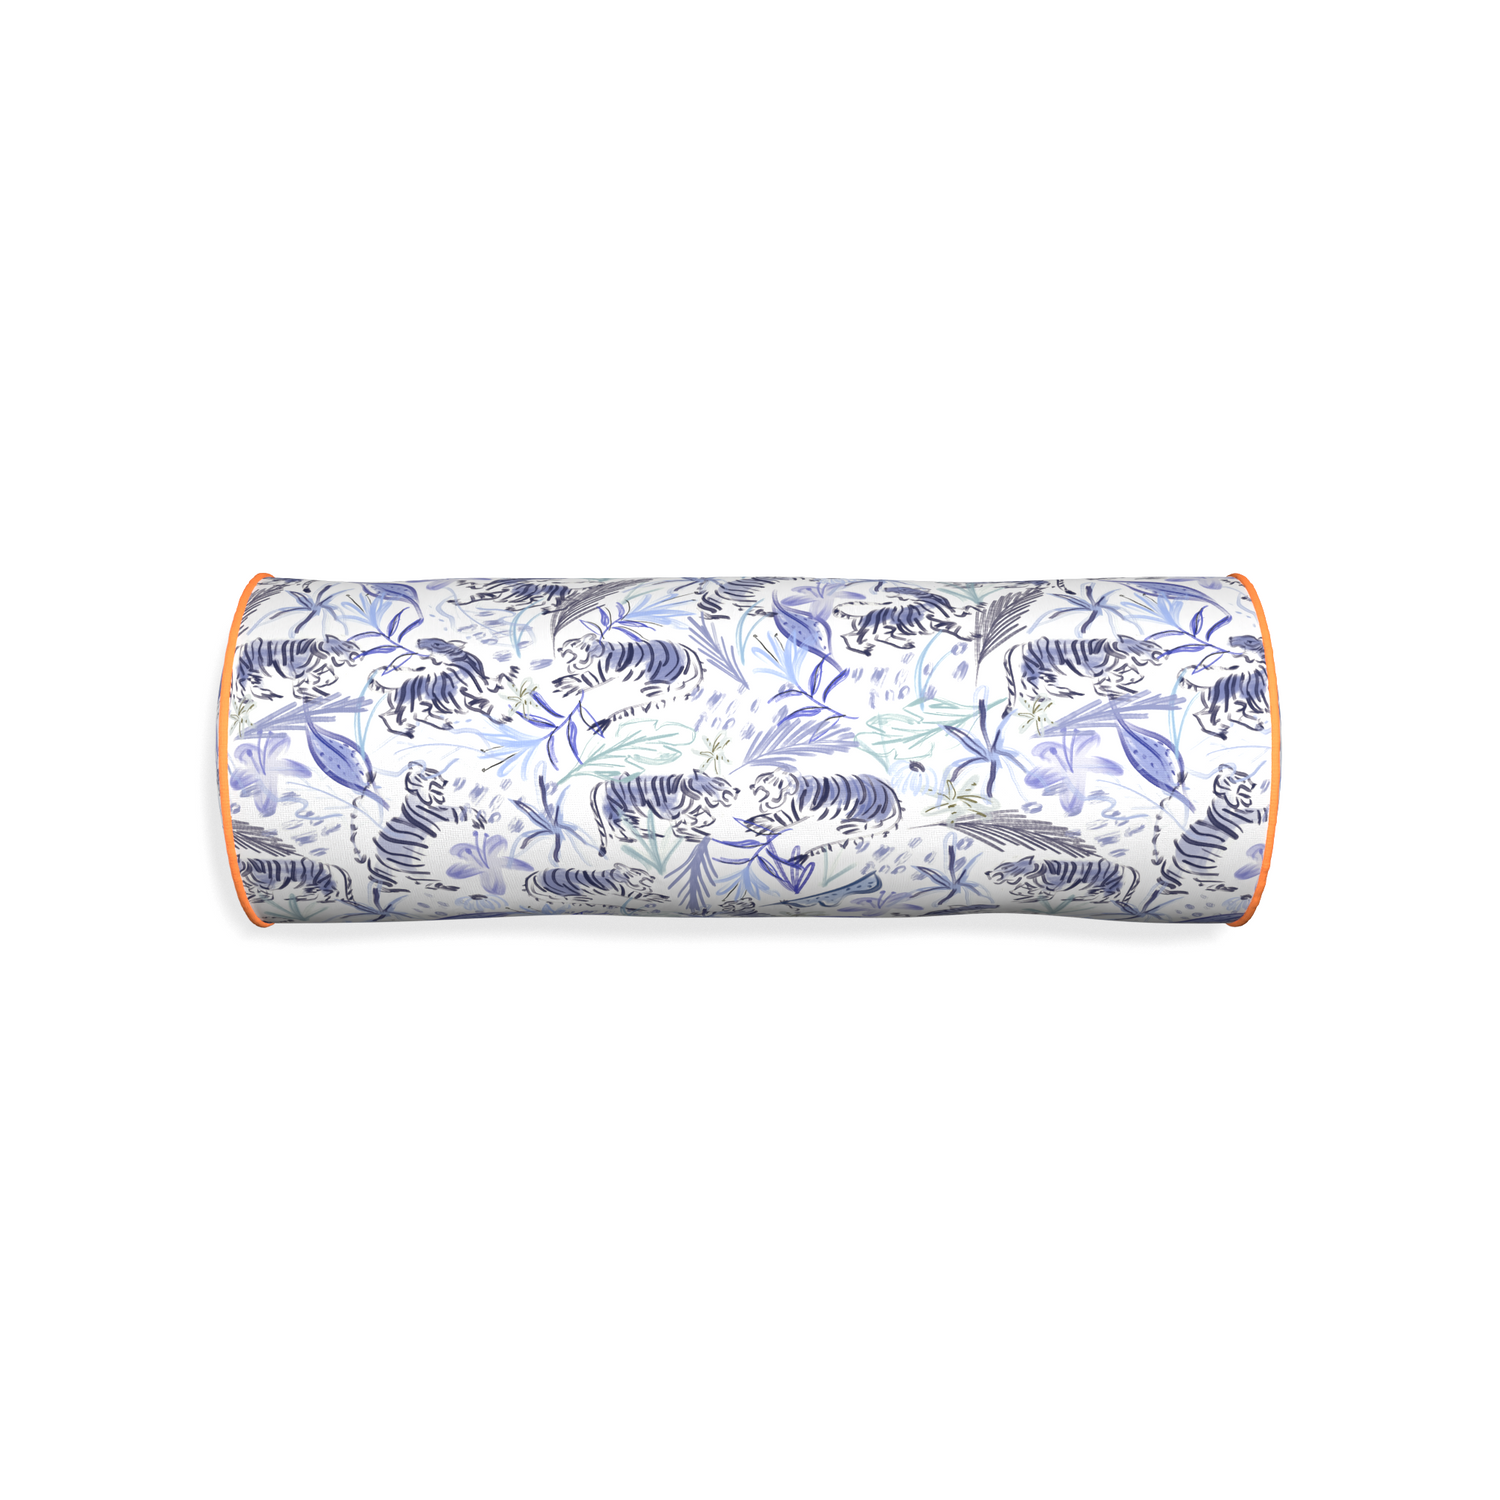 Bolster frida blue custom blue with intricate tiger designpillow with clementine piping on white background